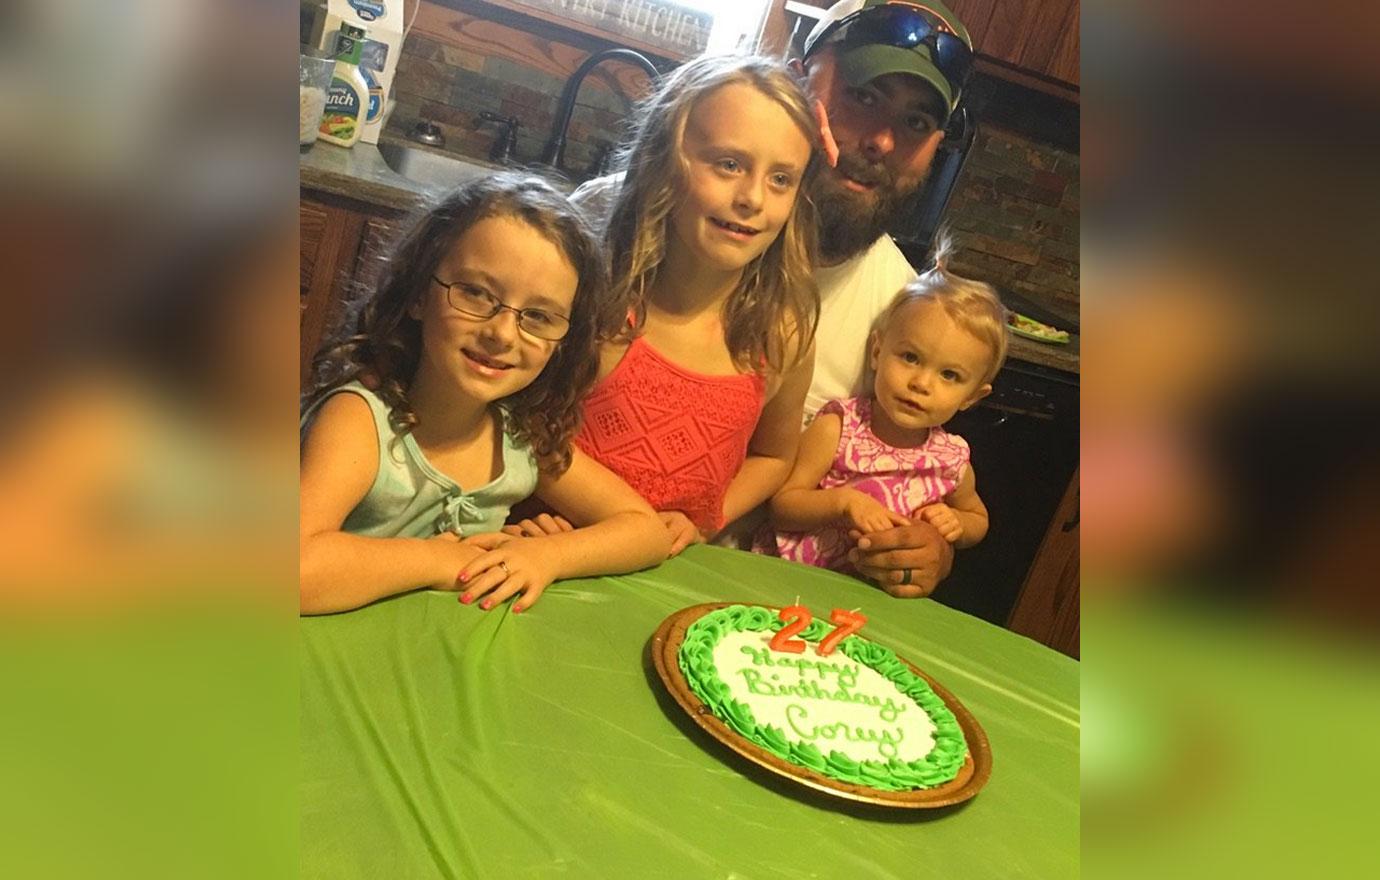 Teen Mom star Corey Simms & wife Miranda's daughter Remi celebrate 6th  birthday in a rare photo with her grandparents